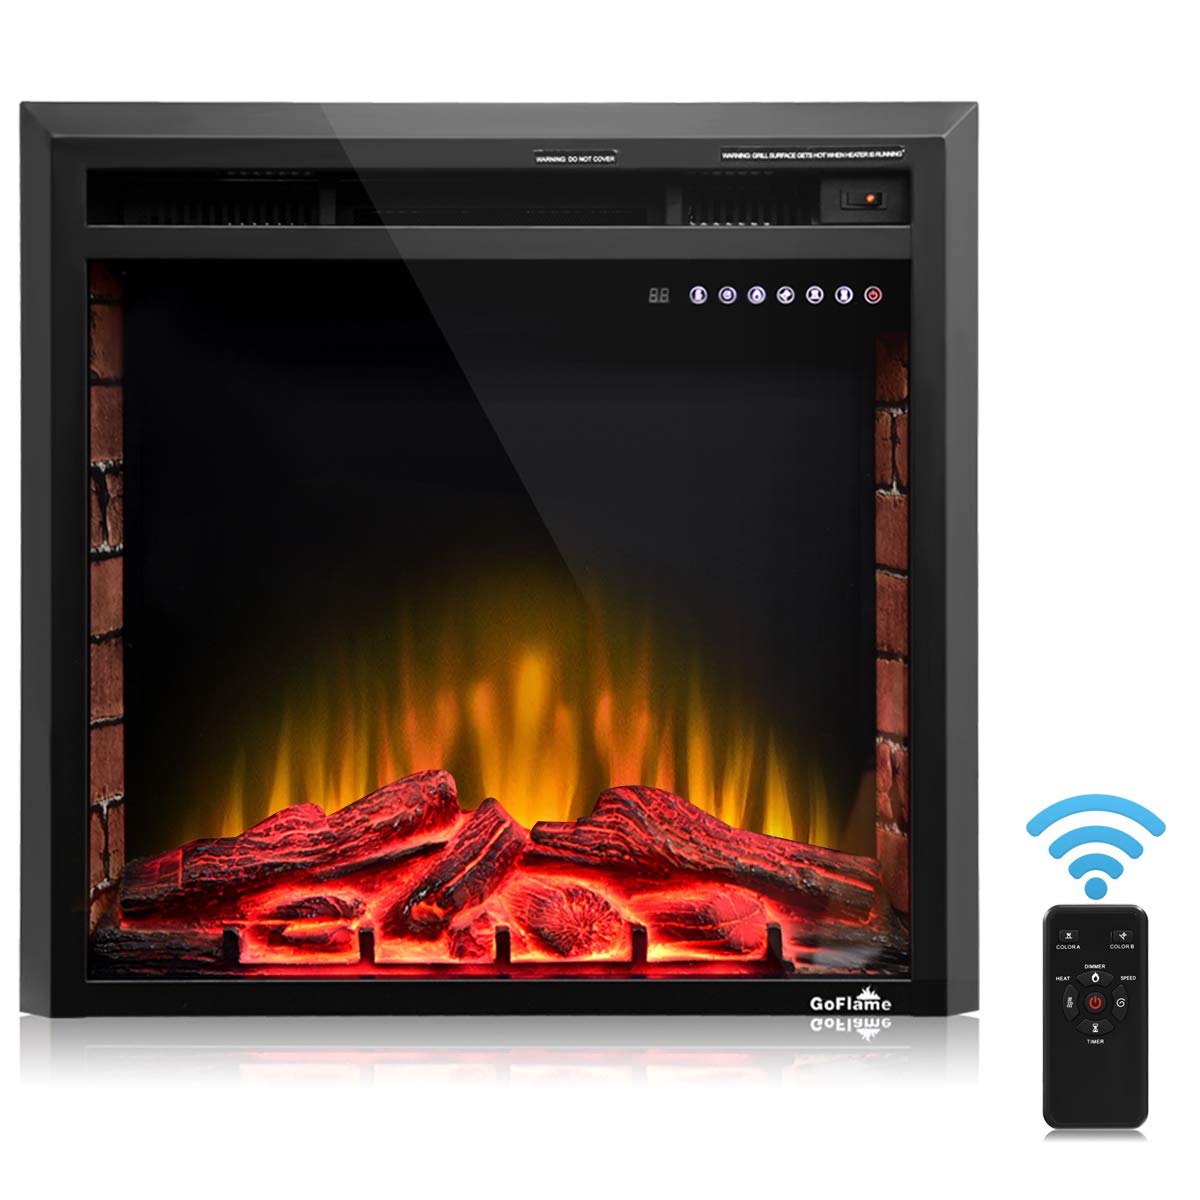 Built In Wall Electric Fireplace Elegant Best fort Recessed 36" Electric Fireplace Multi Operating Electric Fireplace Insert with Remote 750w 1500w Built In Electric Fireplace